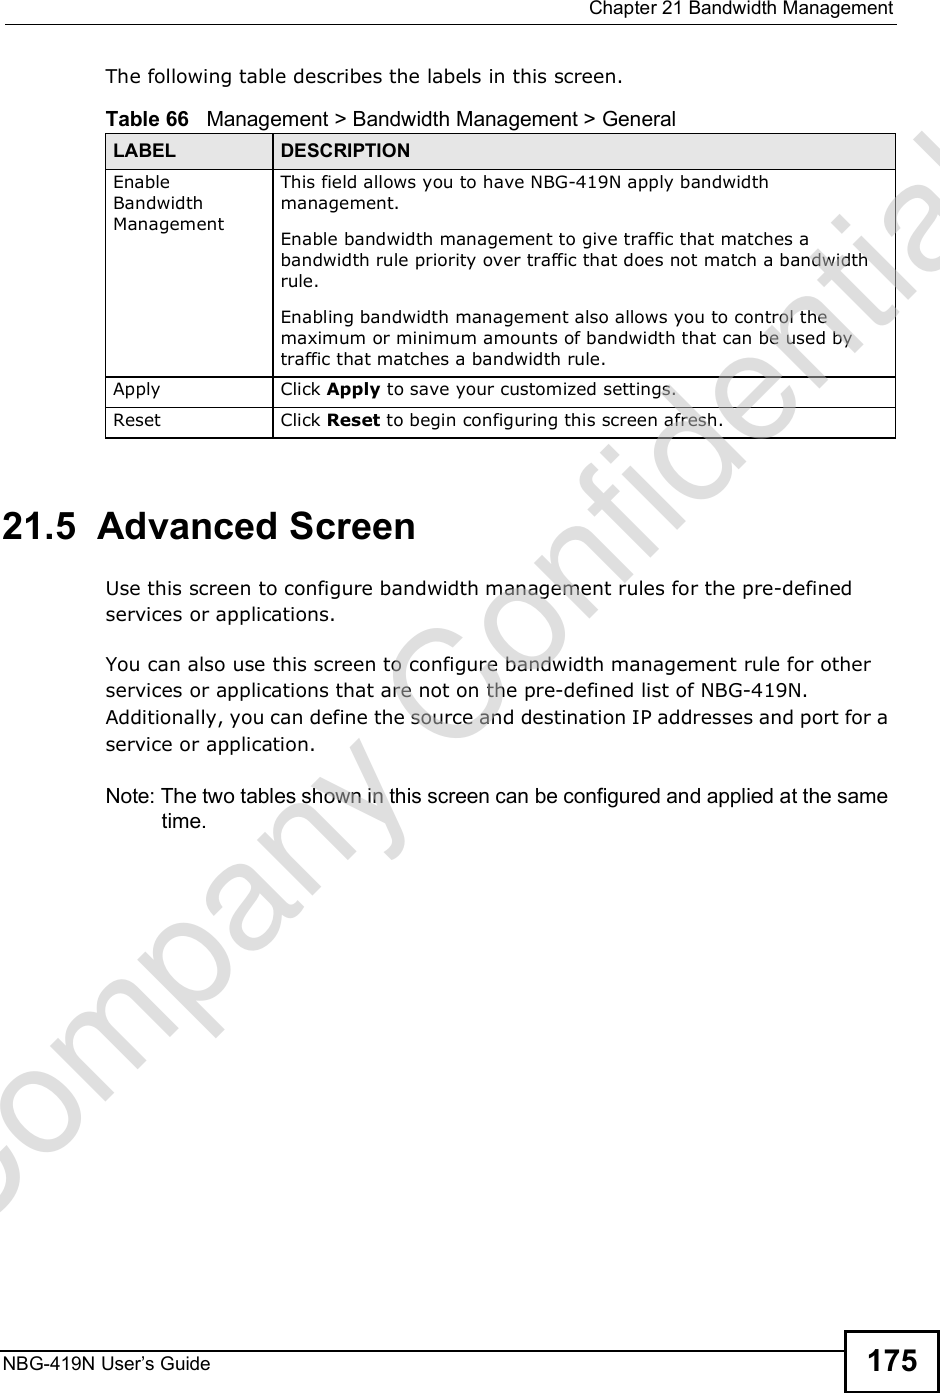  Chapter 21Bandwidth ManagementNBG-419N User s Guide 175The following table describes the labels in this screen.21.5  Advanced Screen Use this screen to configure bandwidth management rules for the pre-defined services or applications. You can also use this screen to configure bandwidth management rule for other services or applications that are not on the pre-defined list of NBG-419N. Additionally, you can define the source and destination IP addresses and port for a service or application.Note: The two tables shown in this screen can be configured and applied at the same time. Table 66   Management &gt; Bandwidth Management &gt; GeneralLABEL DESCRIPTIONEnable Bandwidth Management This field allows you to have NBG-419N apply bandwidth management. Enable bandwidth management to give traffic that matches a bandwidth rule priority over traffic that does not match a bandwidth rule. Enabling bandwidth management also allows you to control the maximum or minimum amounts of bandwidth that can be used by traffic that matches a bandwidth rule. Apply Click Apply to save your customized settings.Reset Click Reset to begin configuring this screen afresh.Company Confidential